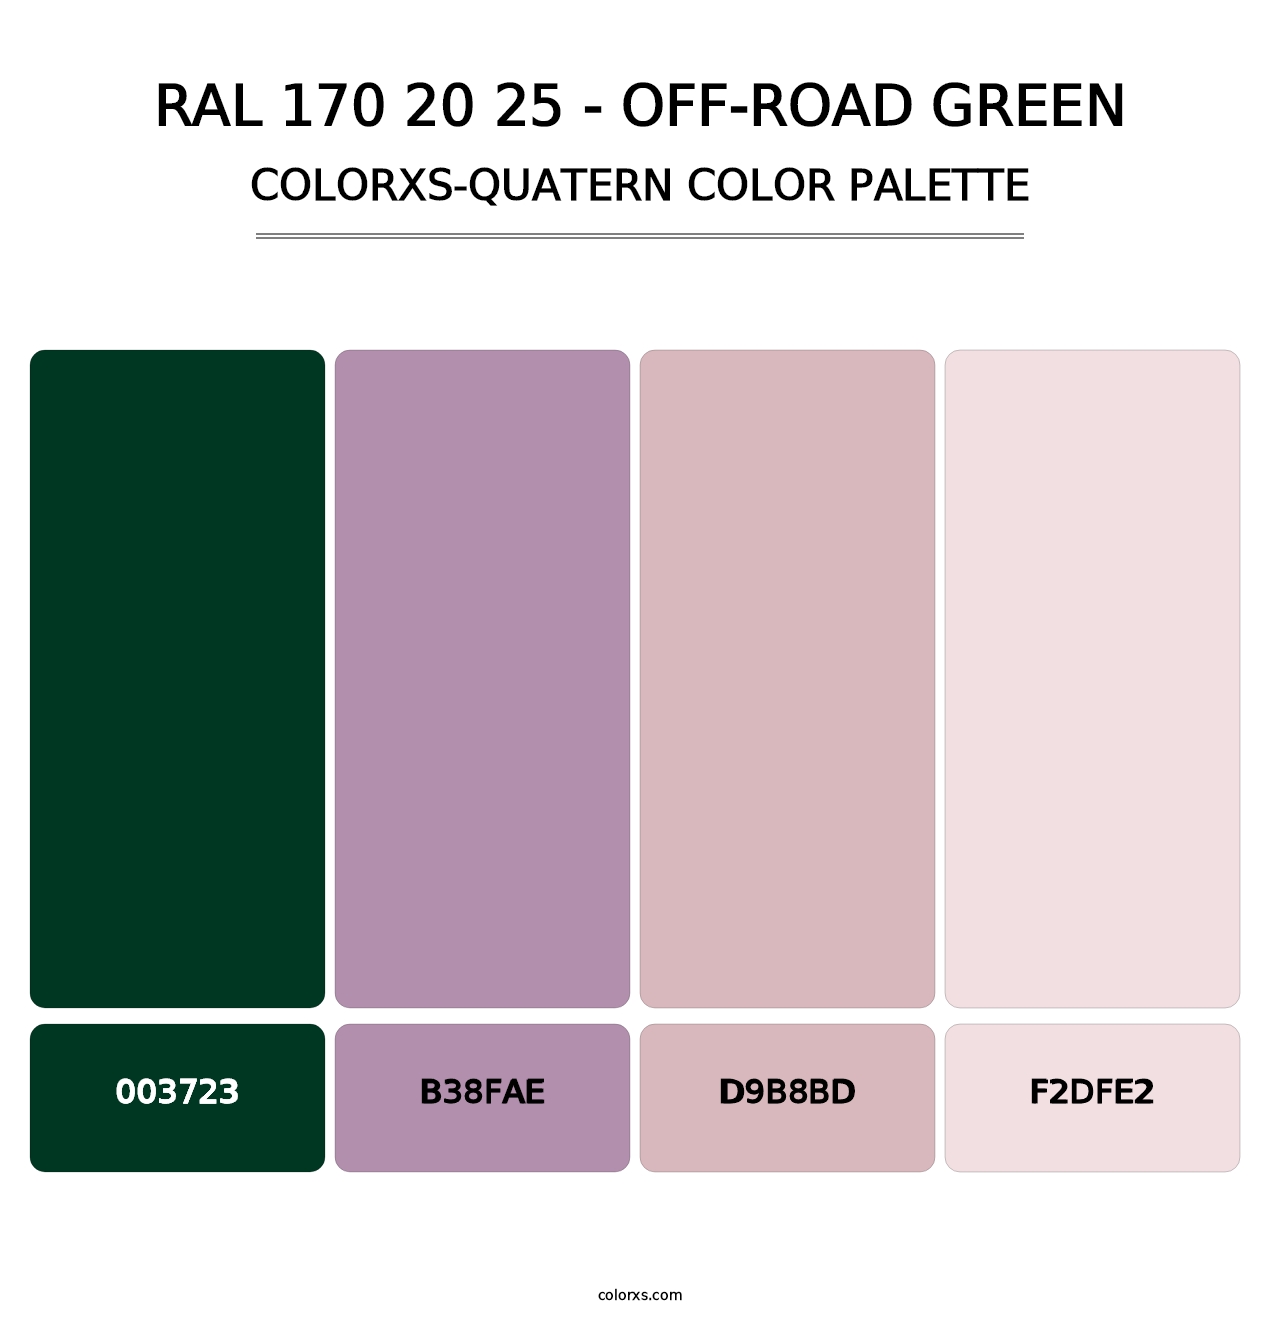 RAL 170 20 25 - Off-Road Green - Colorxs Quatern Palette